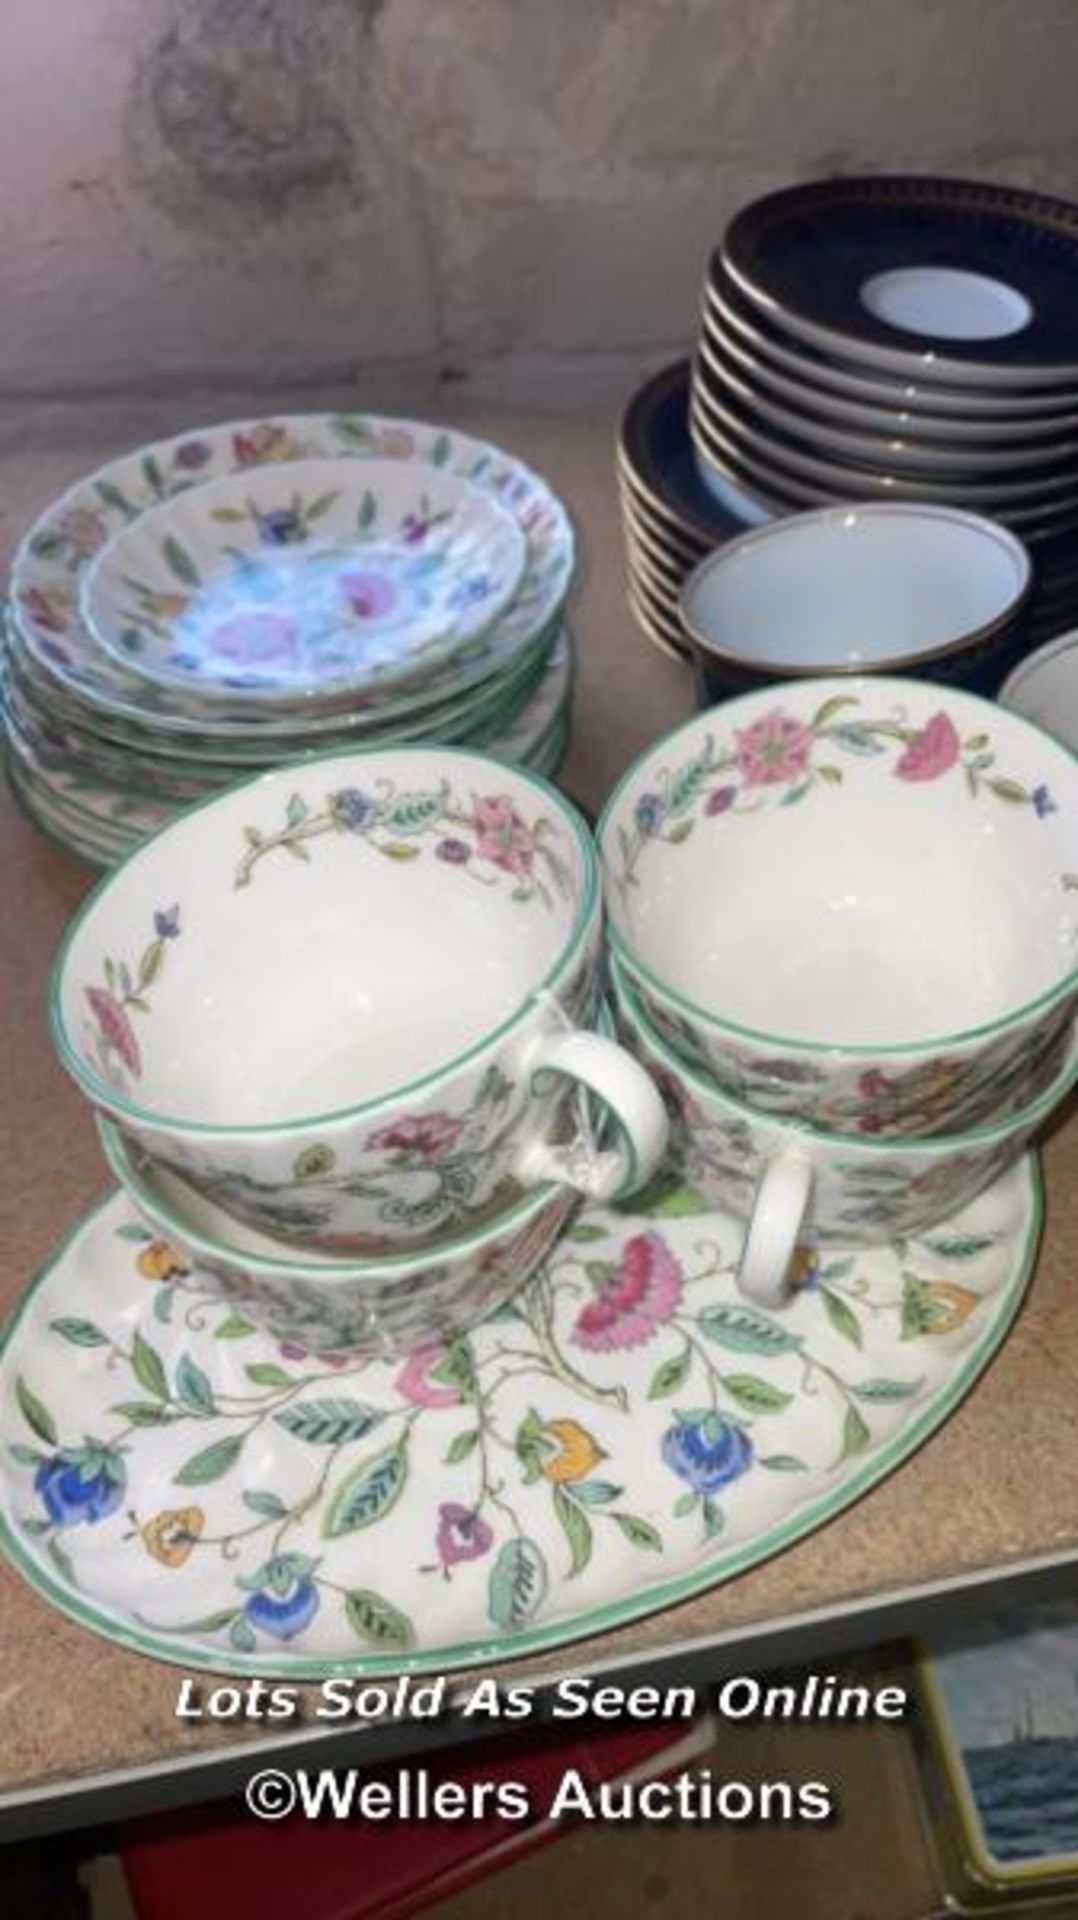 MINTON HADDON HALL, FOUR CUPS, SAUCERS AND TEA PLATES, OVAL DISH, PIN DISH; ROMANOV PORCELAIN 7 CUPS - Image 2 of 9